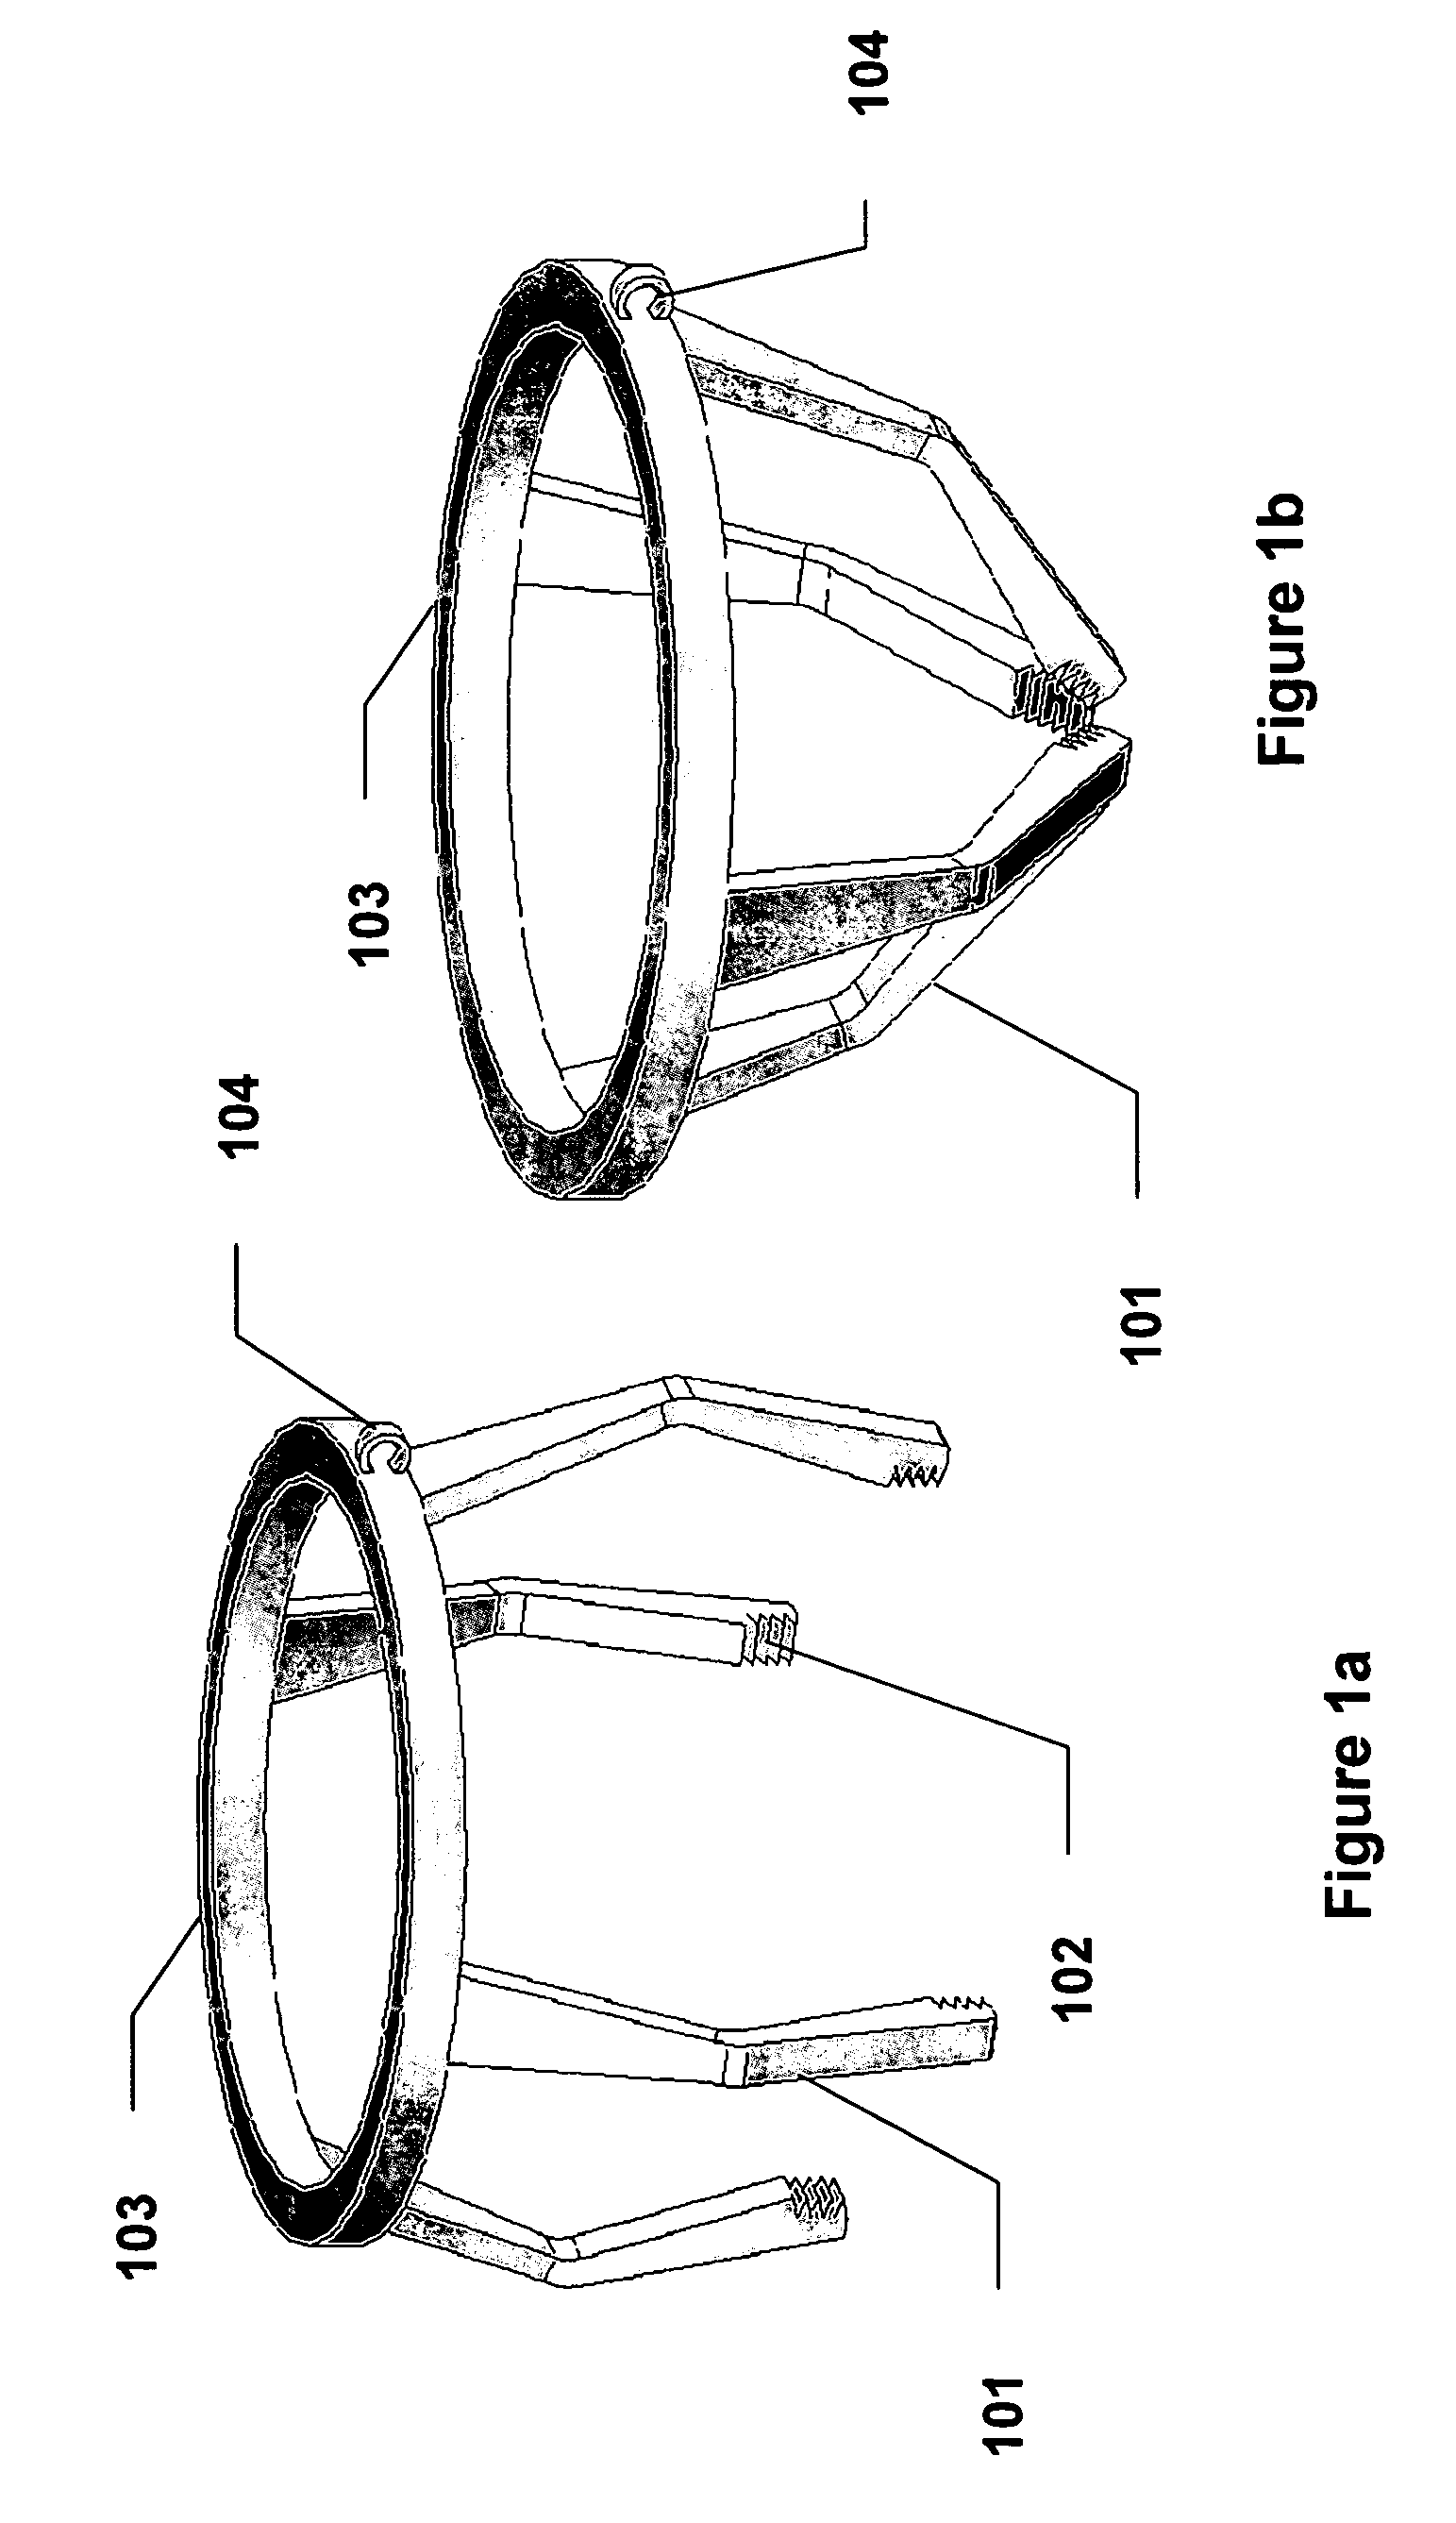 Vascular closure methods and apparatuses